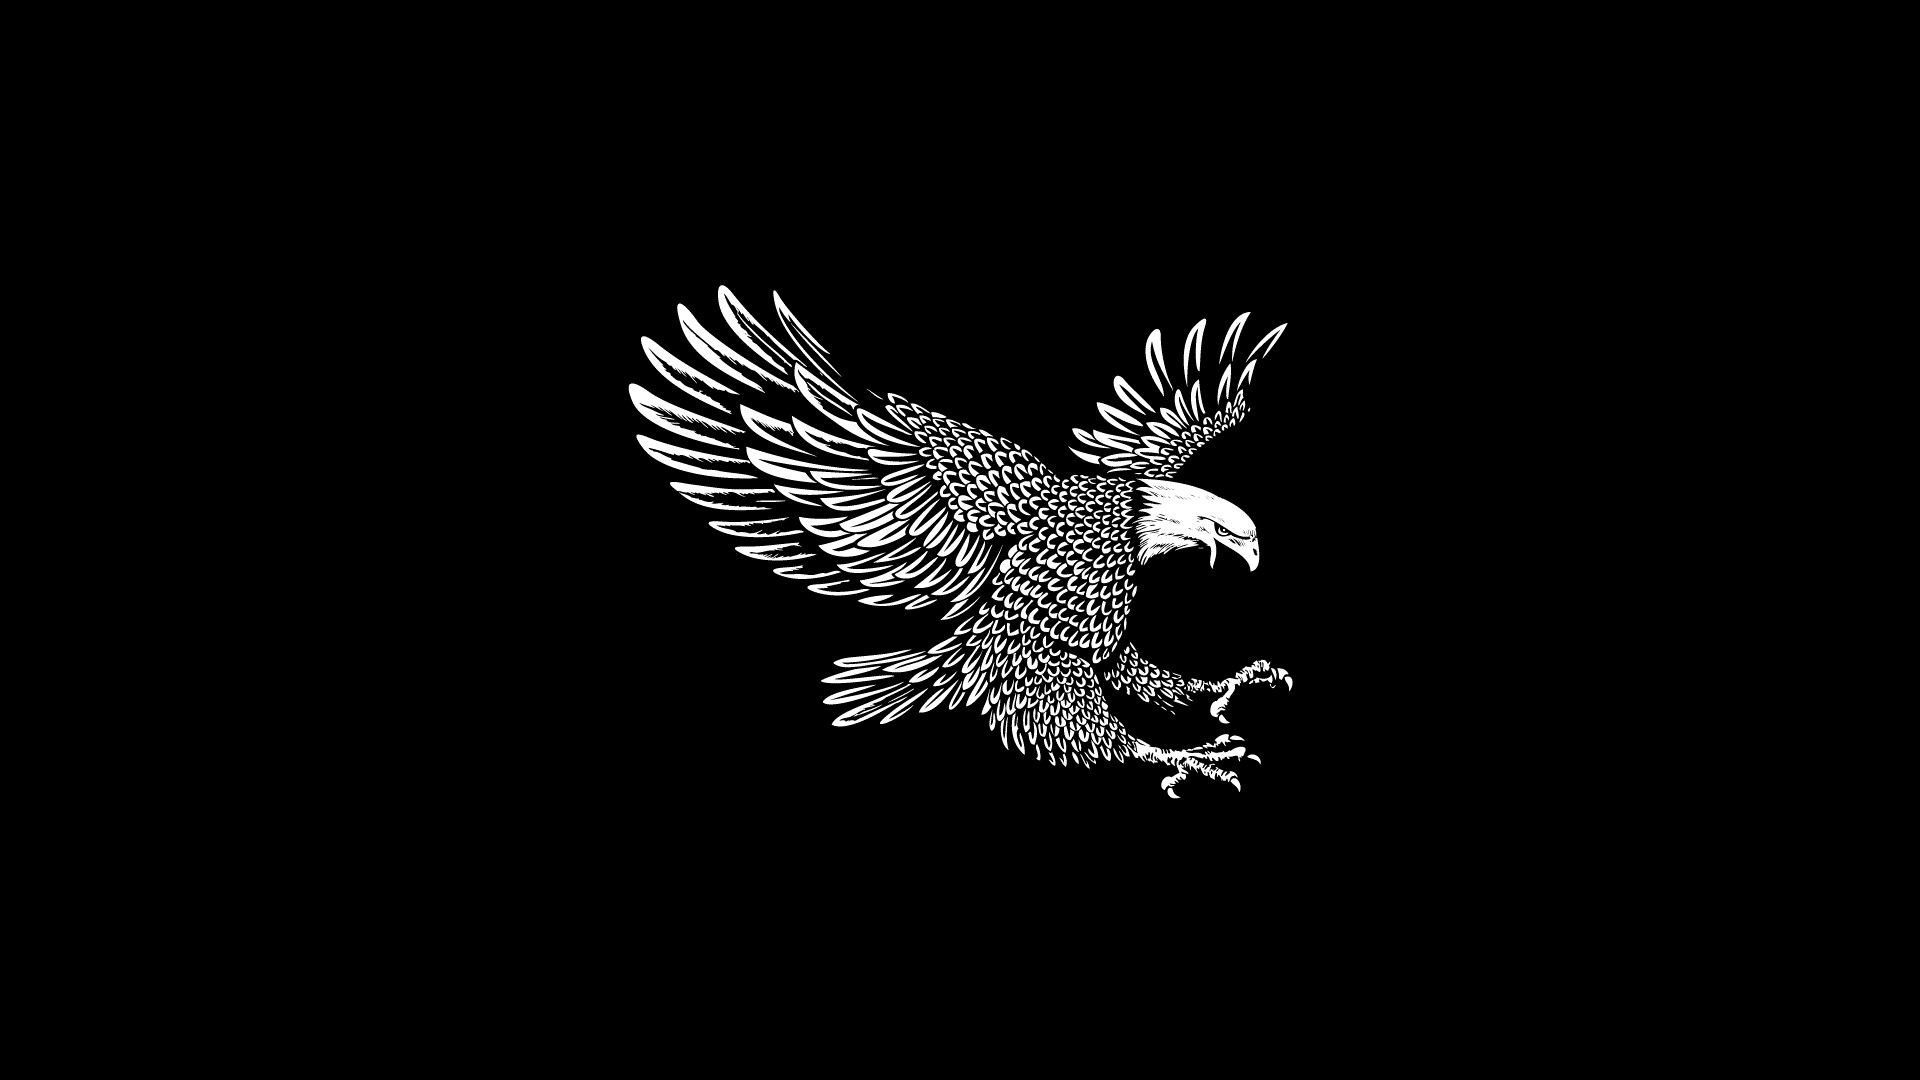 Wallpaper Eagle, wings, flight, black background, art picture 1920x1080 Full HD 2K Picture, Image